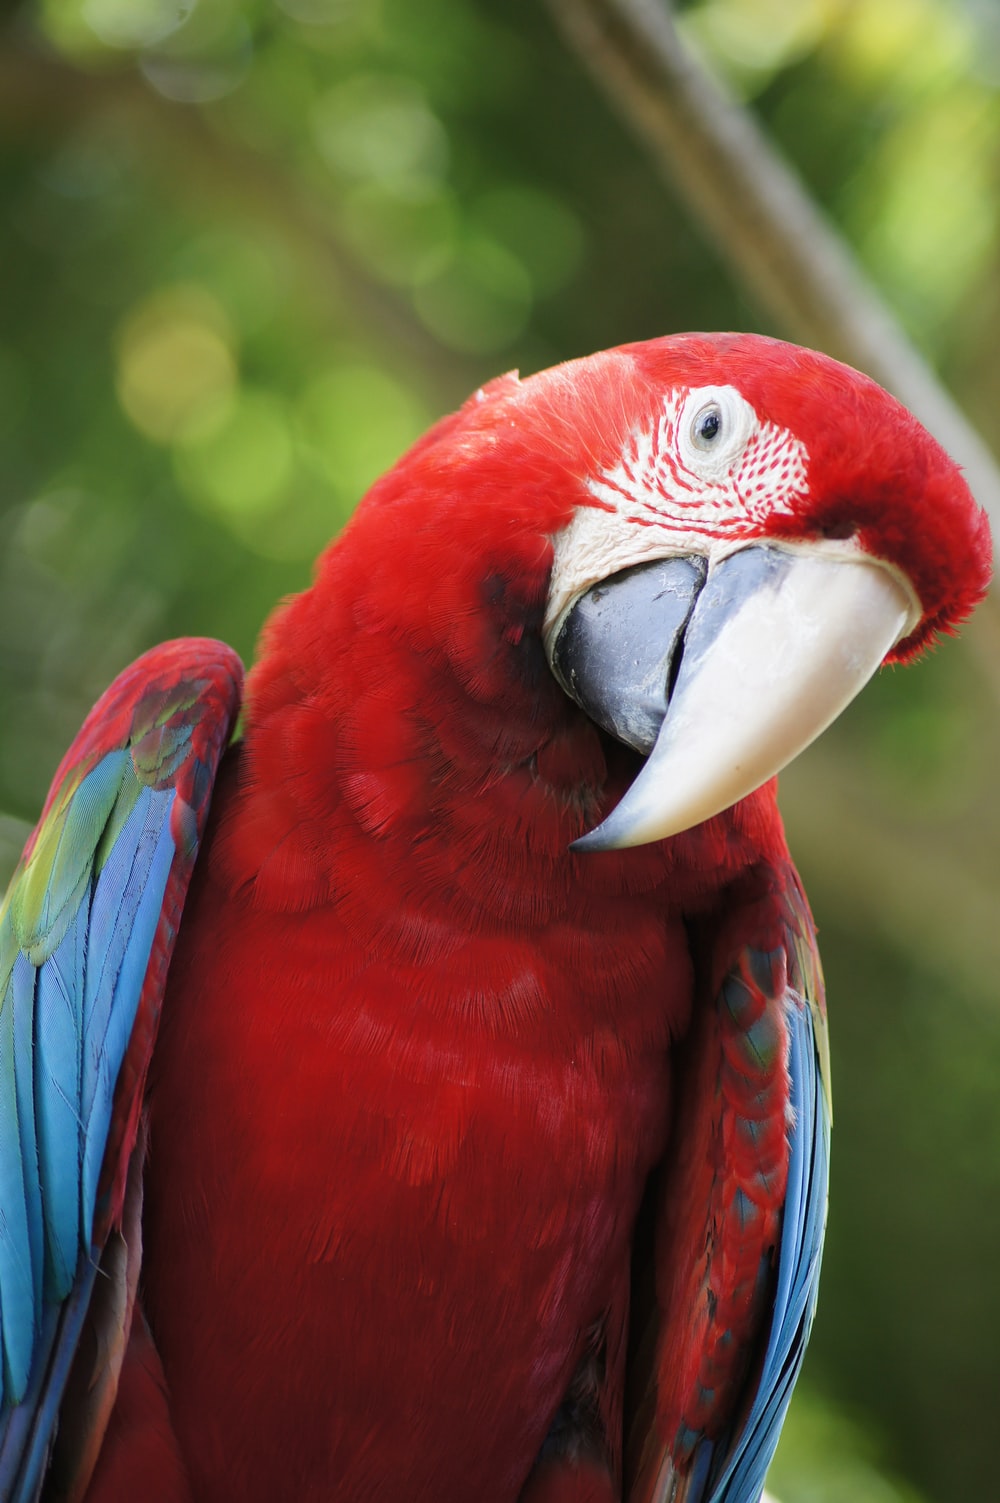 Red Parrot Picture. Download Free Image